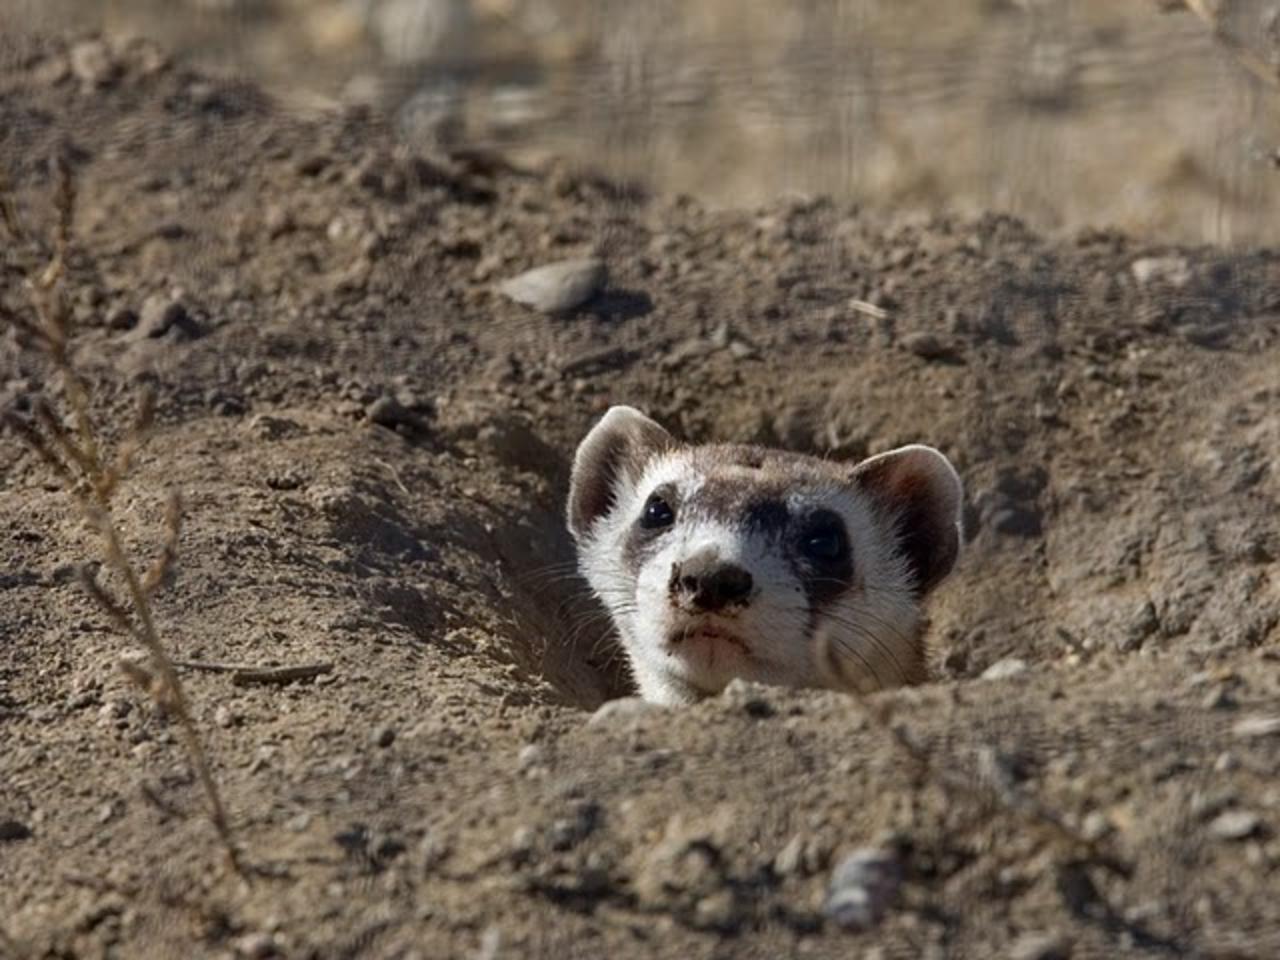 Little known fact for most of Greater Yellowstone's human denizens: the black-footed ferret, the most endangered land mammal in America, was thought extinct, until a rancher's dog near Meeteetse, Wyoming (inside the Greater Yellowstone Ecosystem) brought a dead one back to the ranch house which led to the discovery that ferrets still were barely hanging on. It was a profound demonstration of how important habitat on private property is to conservation. Ferrets, which represent no threat to people or livestock, can only persist if there are thriving prairie dogs available for them to eat.  